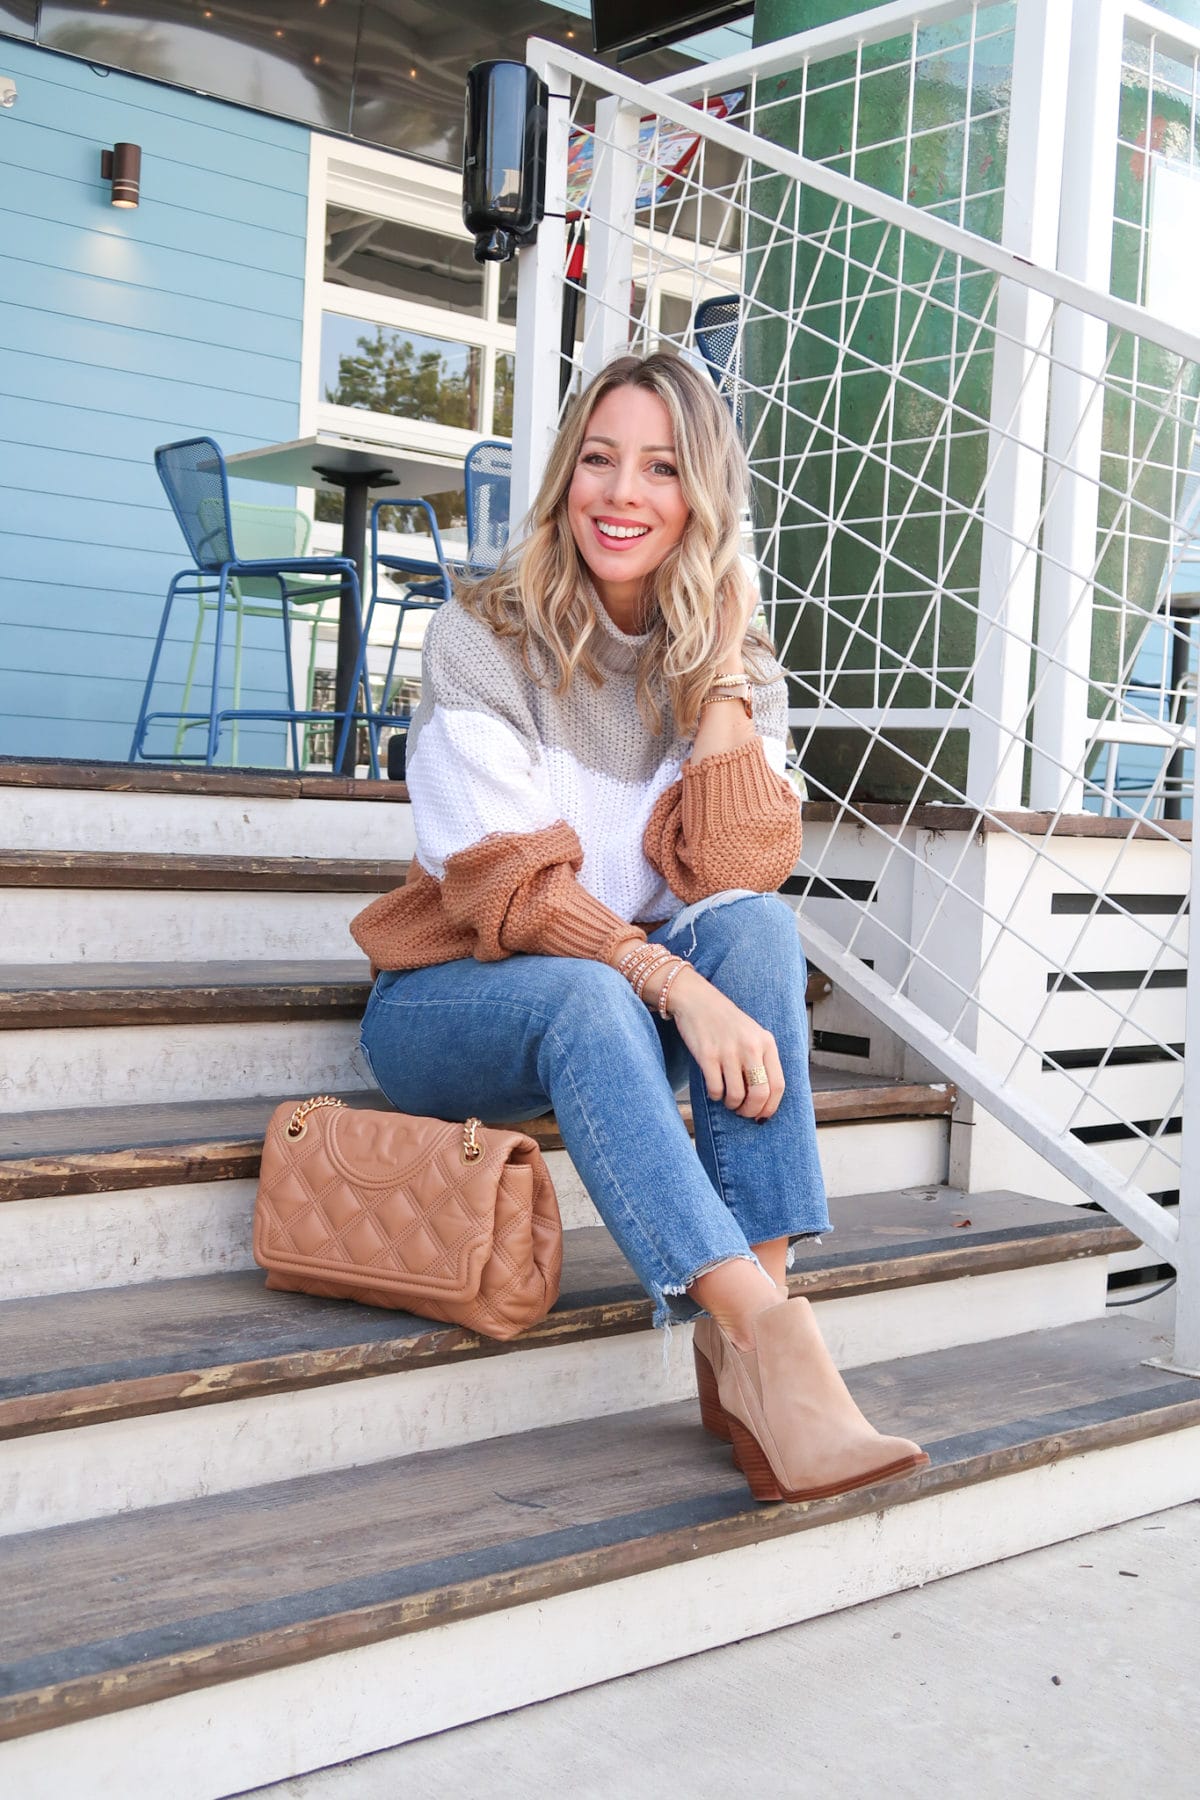 Outfits Lately, Colorblock Sweater, Jeans, Booties, Crossbody